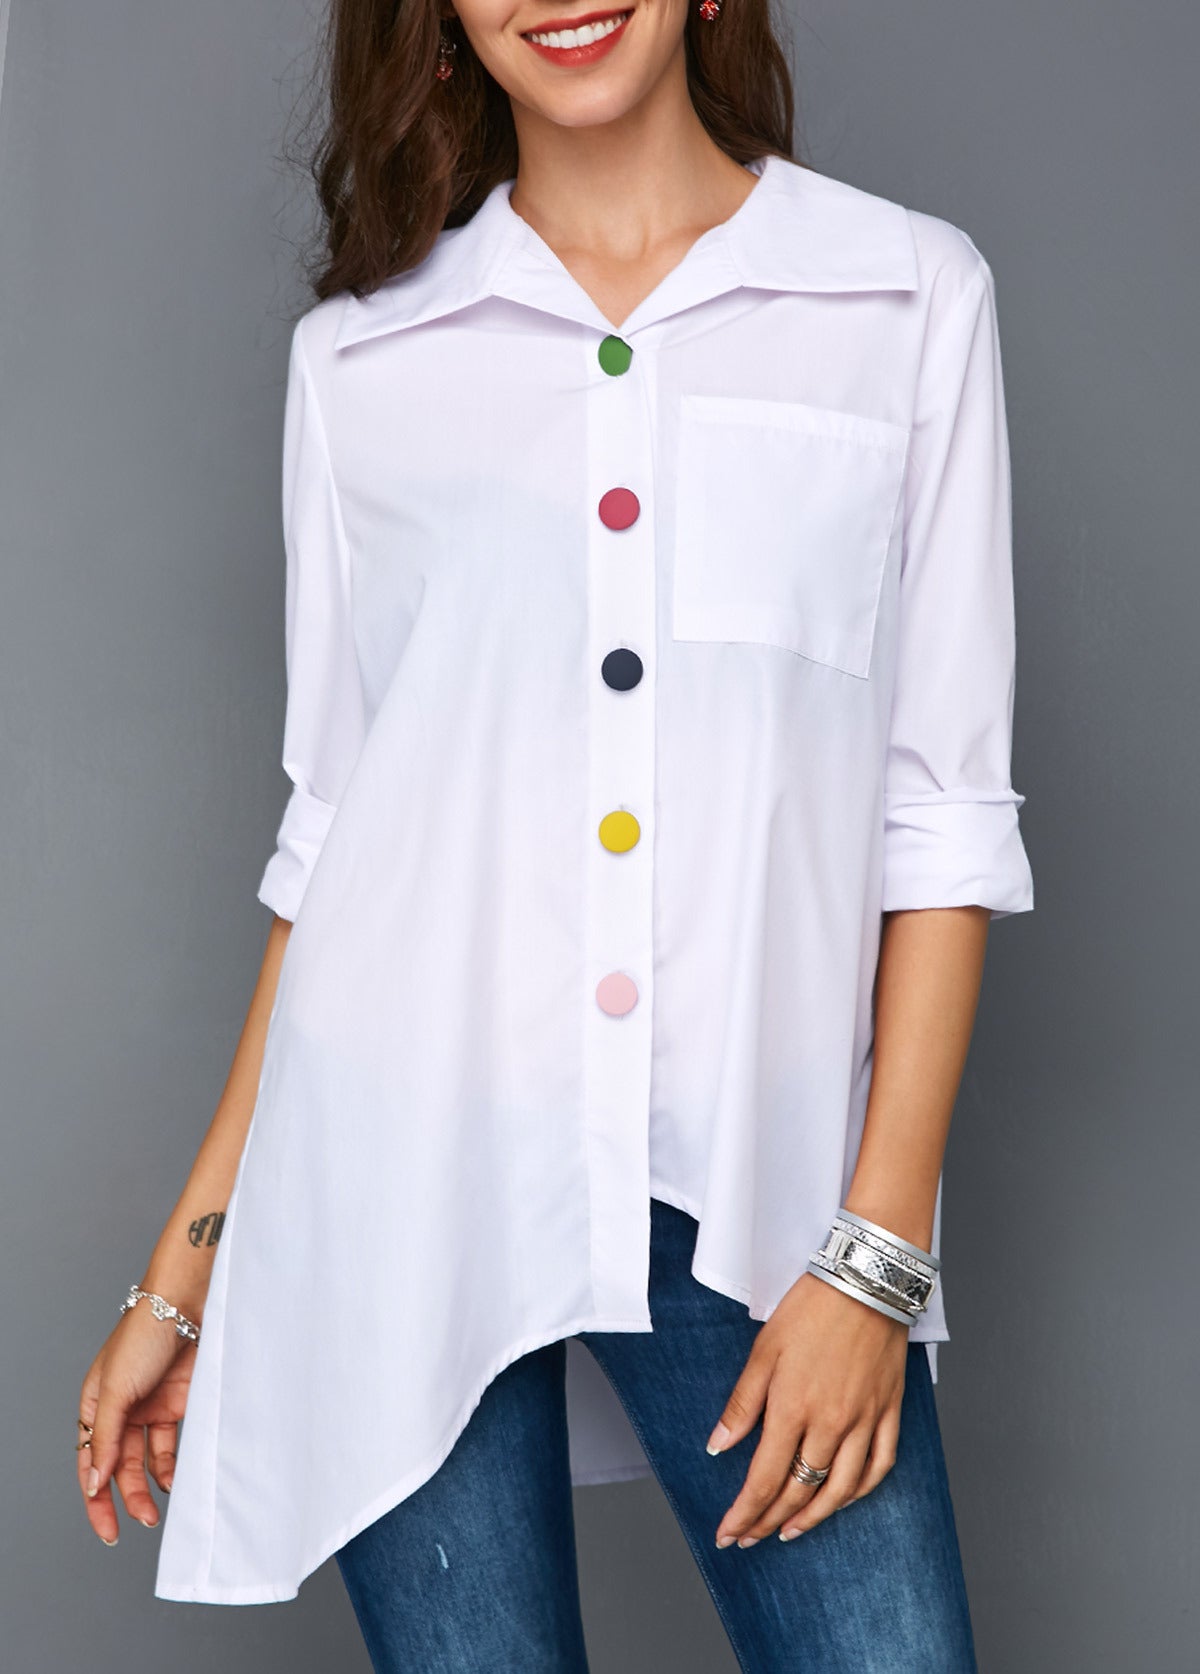 Women white shirt  colorful button simple tops